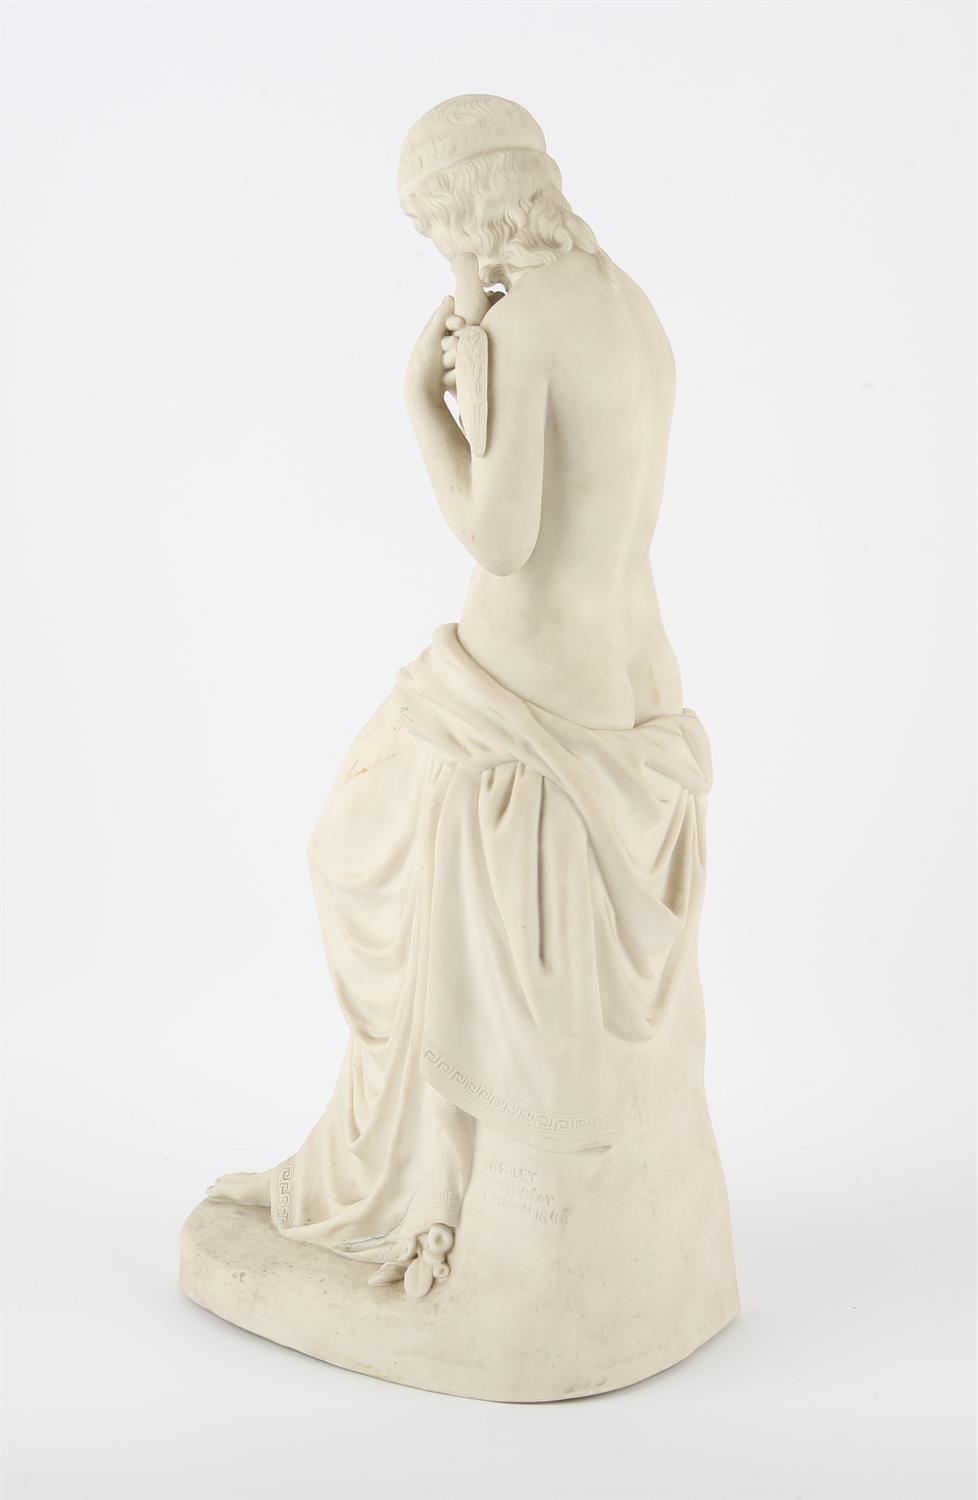 W. T. COPELAND FOR THE ART UNION OF LONDON, a Parian figure of Innocence after J.T. - Image 2 of 2